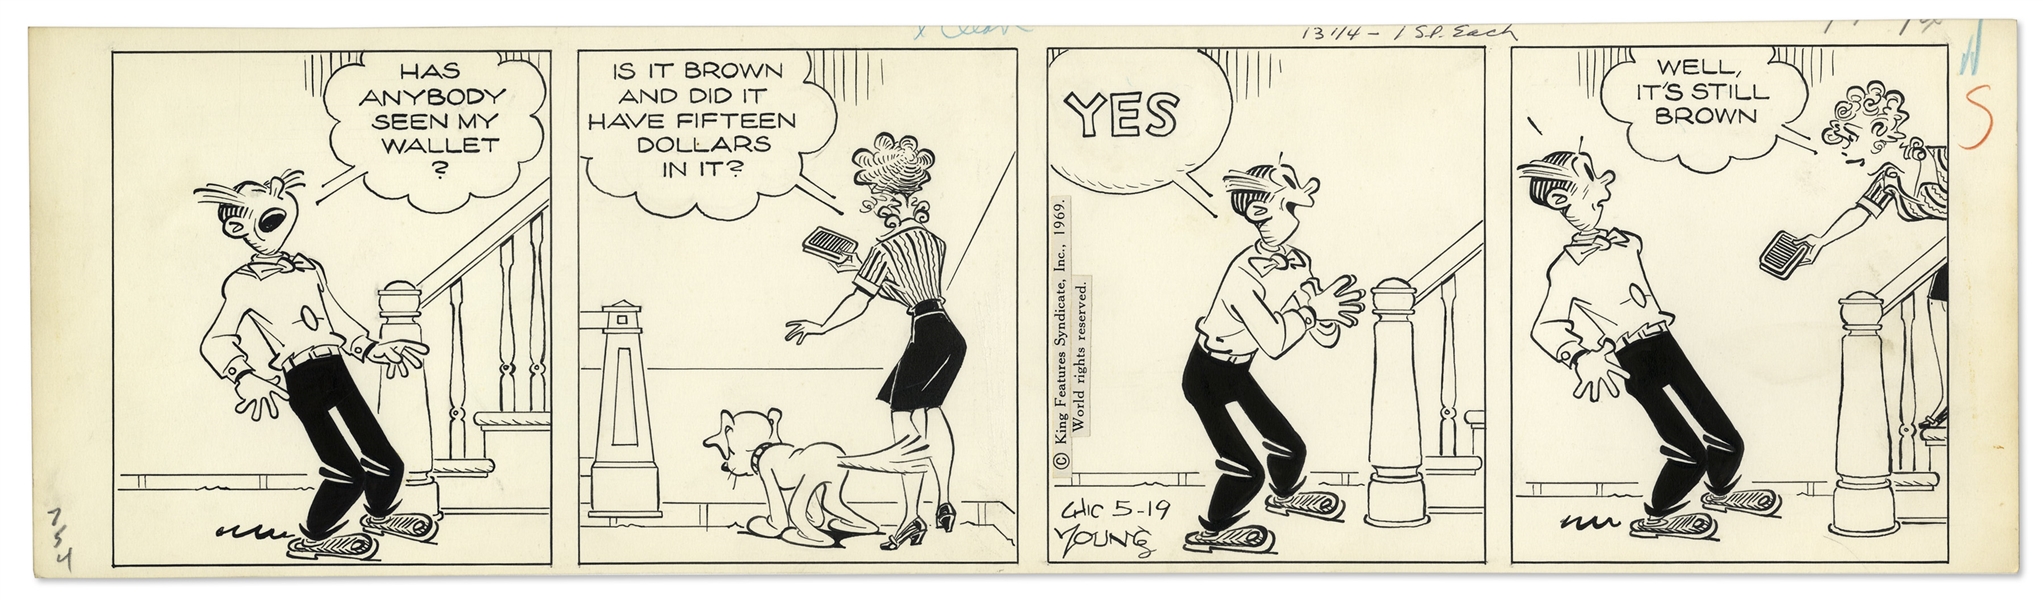 2 Chic Young Hand-Drawn ''Blondie'' Comic Strips From 1969 -- With Chic Young's Original Preliminary Artwork for One